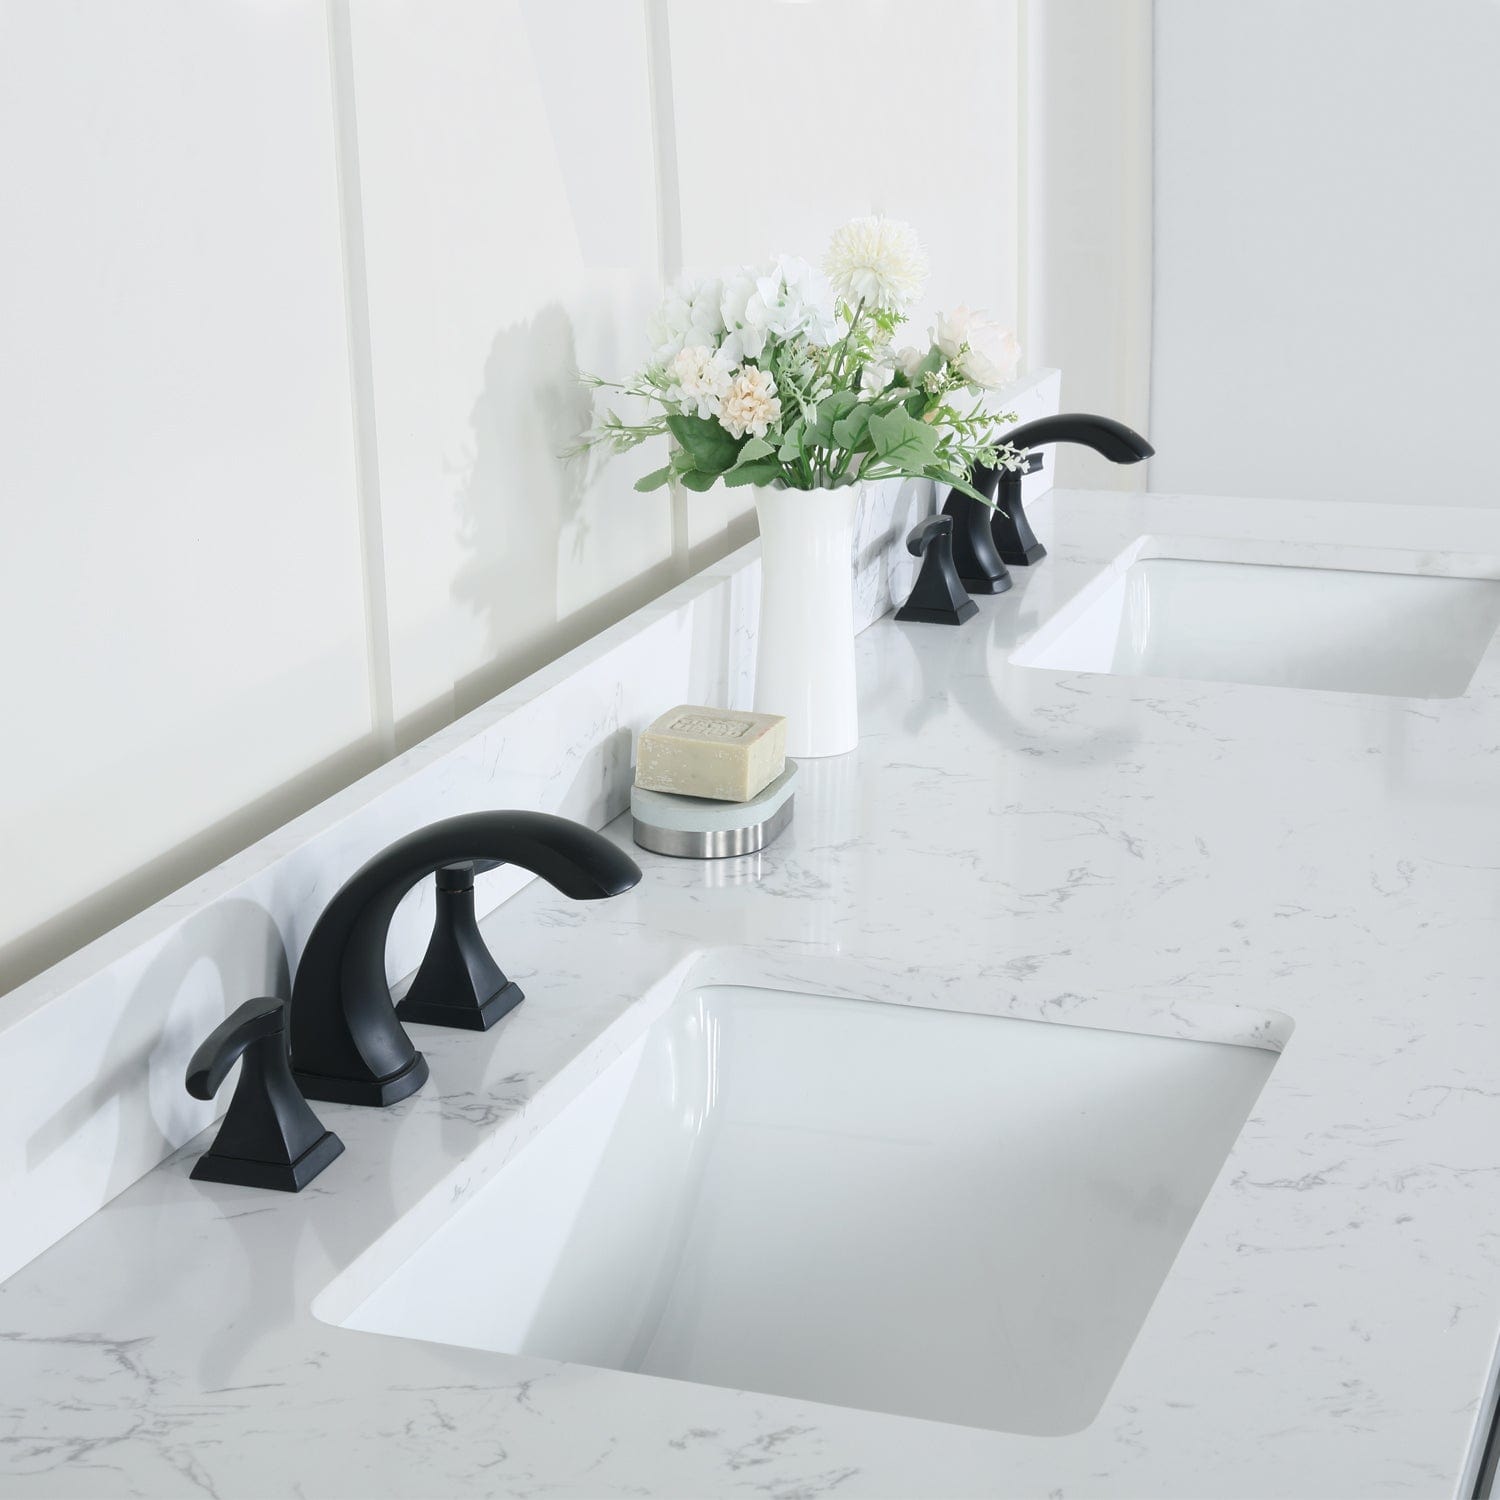 Altair Kinsley 72" Double Bathroom Vanity Set in White and Carrara White Marble Countertop without Mirror 536072-WH-AW-NM - Molaix696952511307Vanity536072-WH-AW-NM